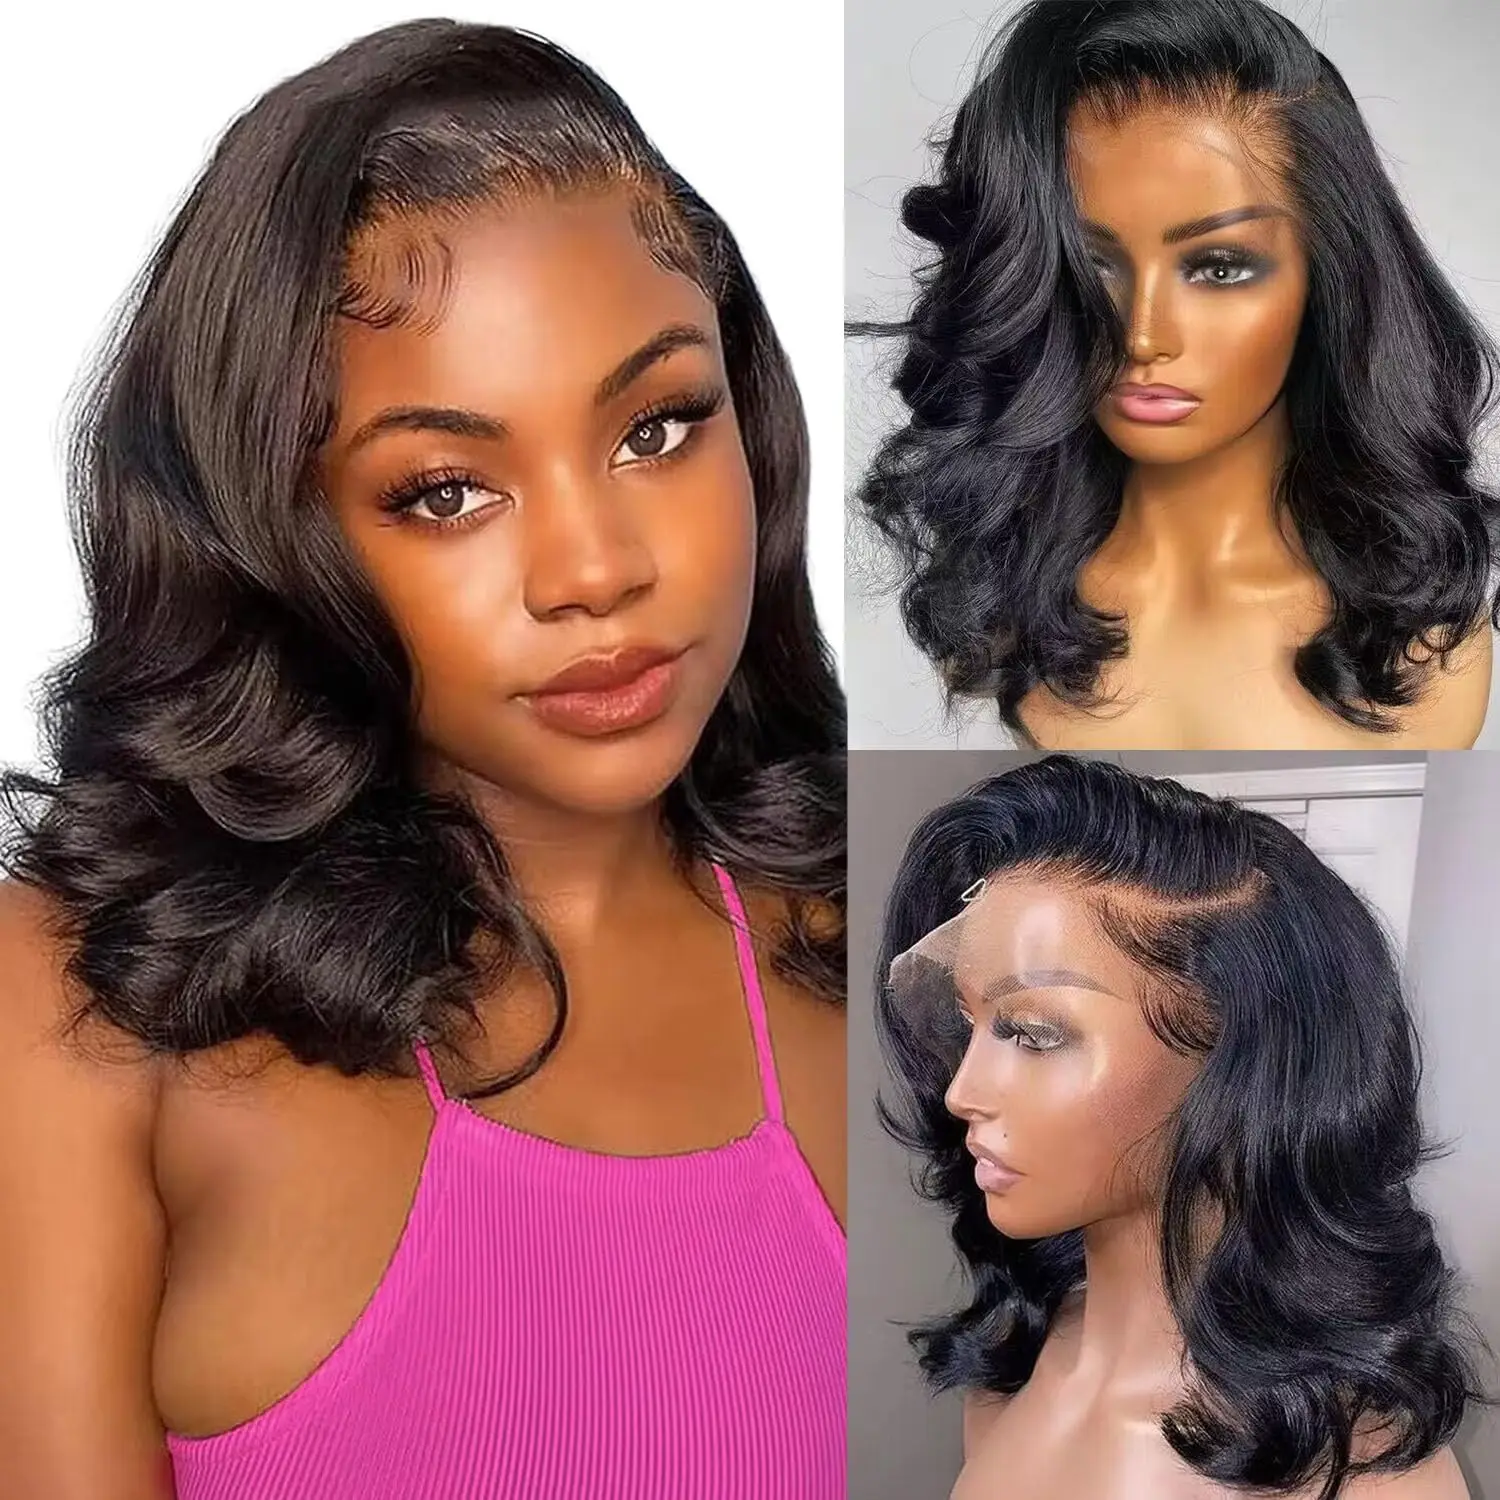 

Human Hair 13x4 Body Wave HD Lace Front Wigs 180% Density Glueless Wigs Human Hair Pre Plucked Short Bob Wigs for Black Women